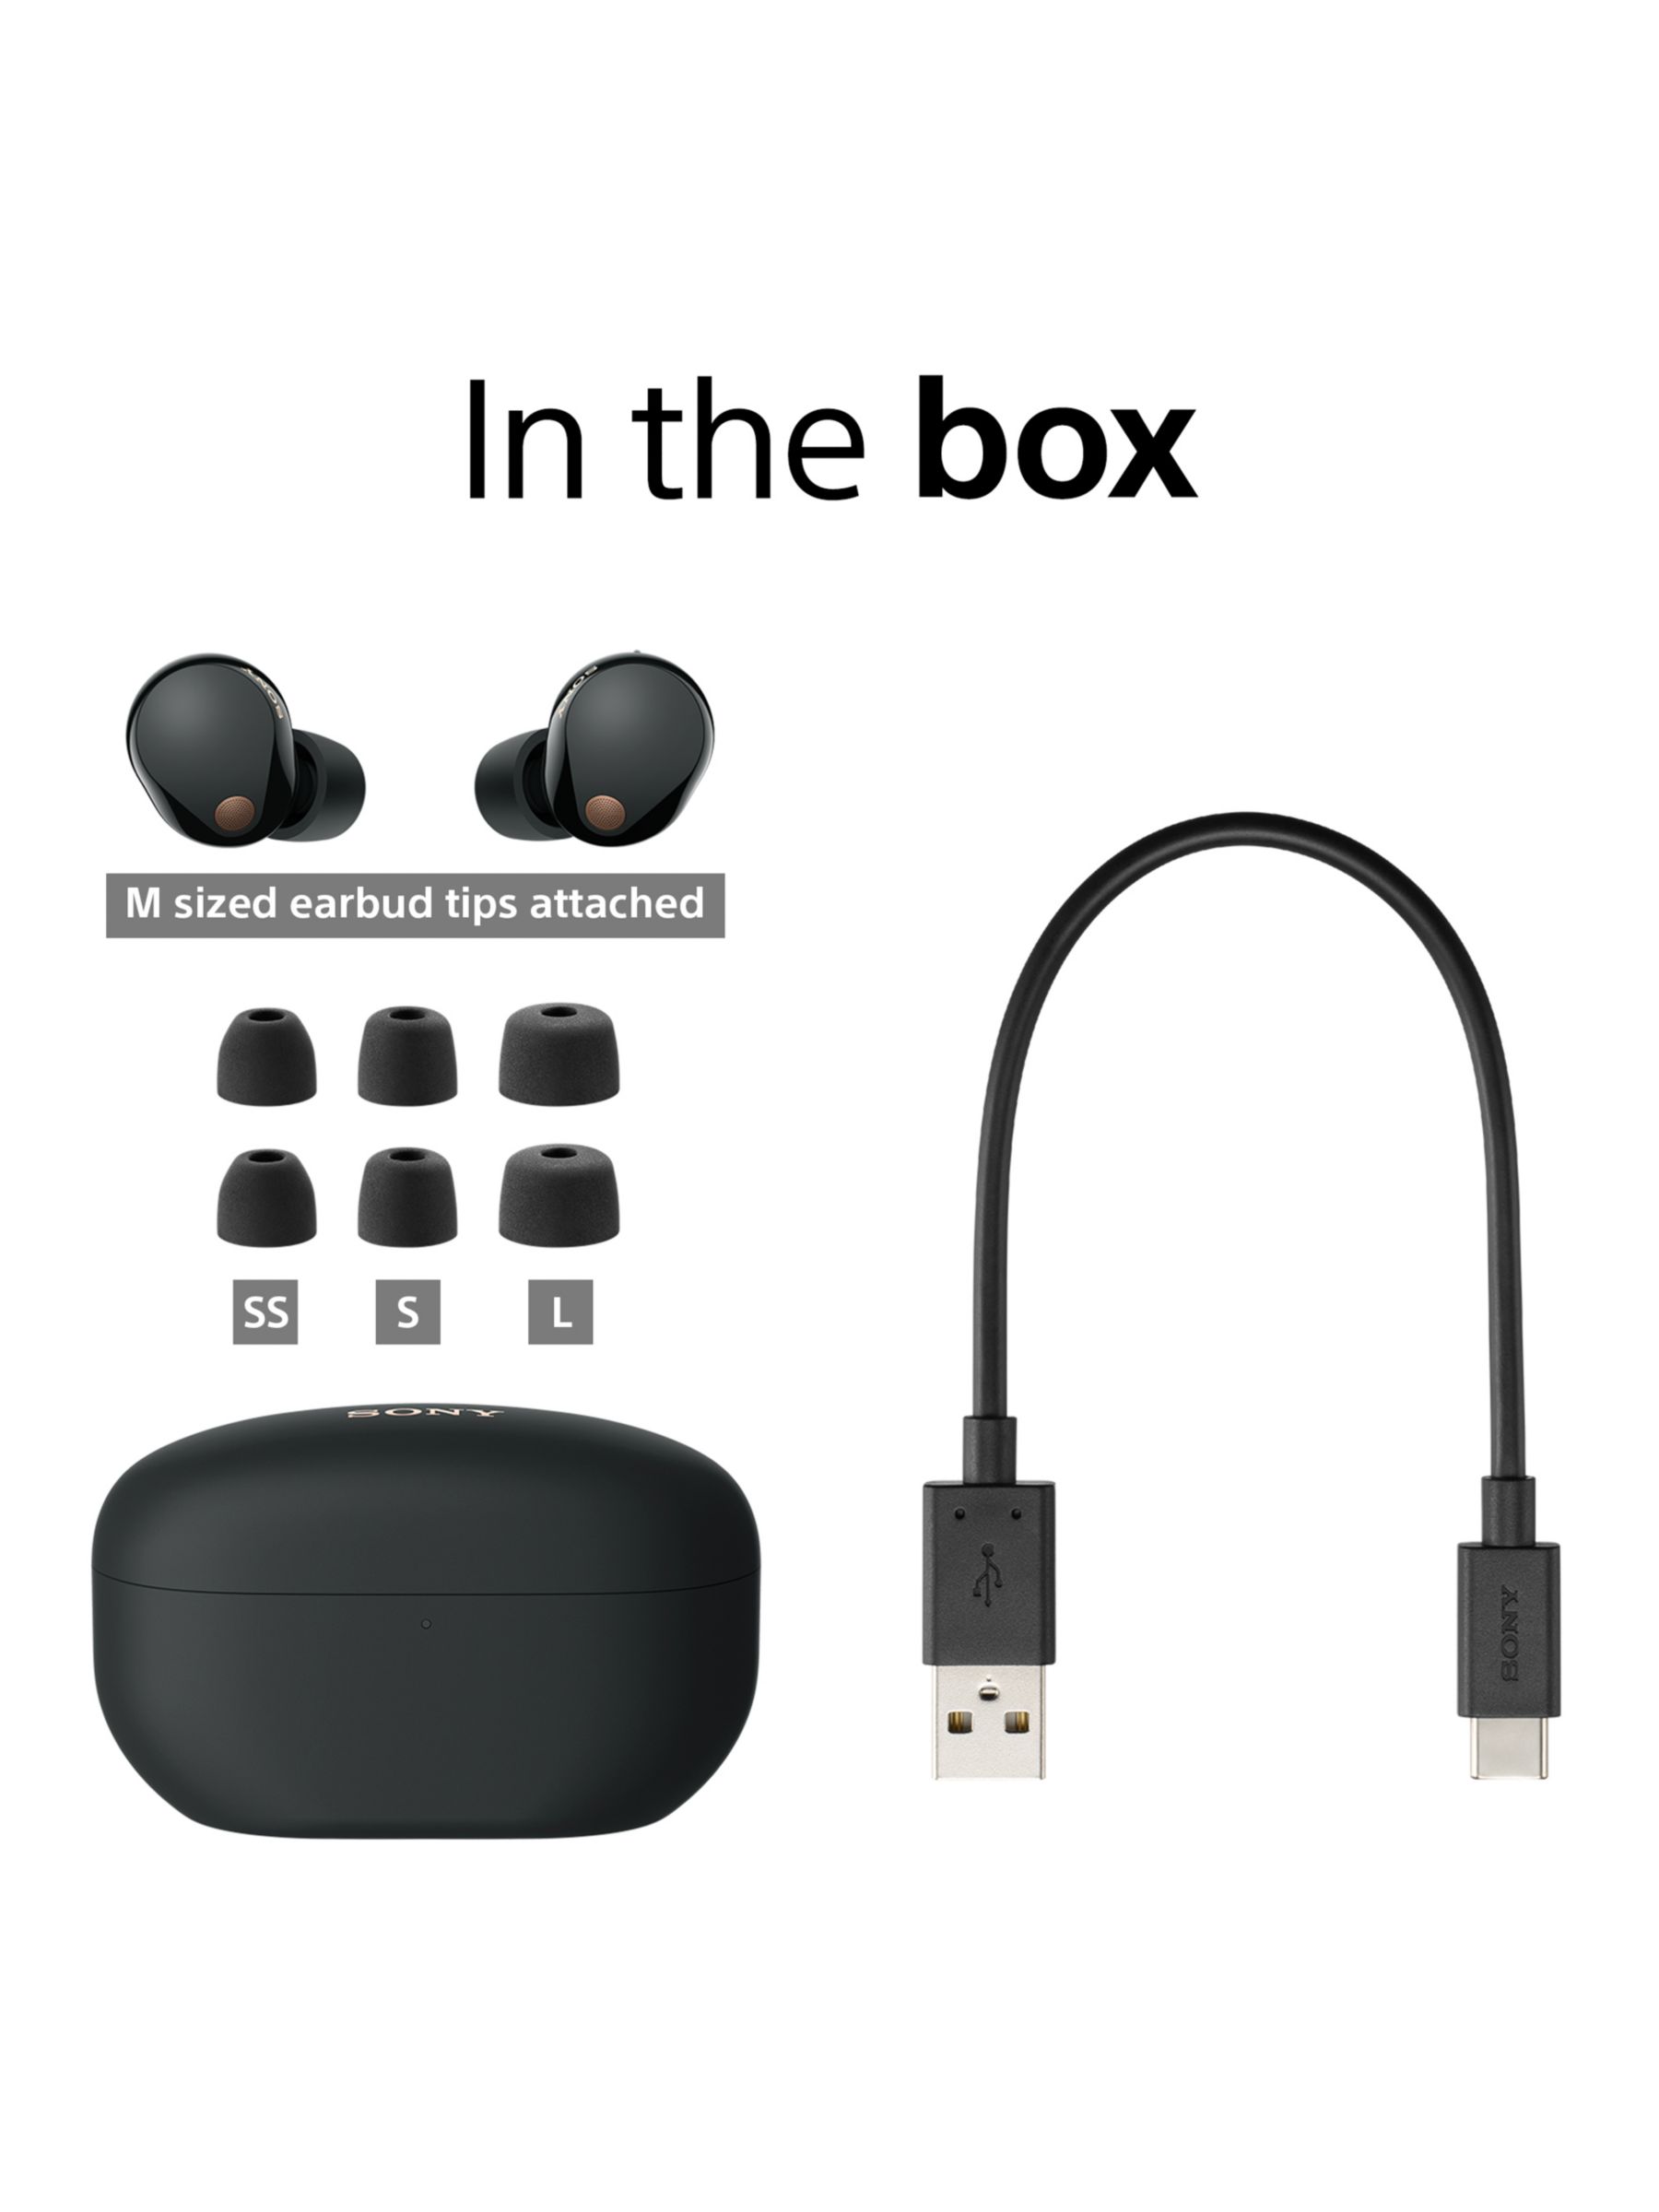  Sony WF-1000XM5 The Best Truly Wireless Bluetooth Noise  Canceling Earbuds Headphones with Alexa Built in, Black- New Model :  Electronics